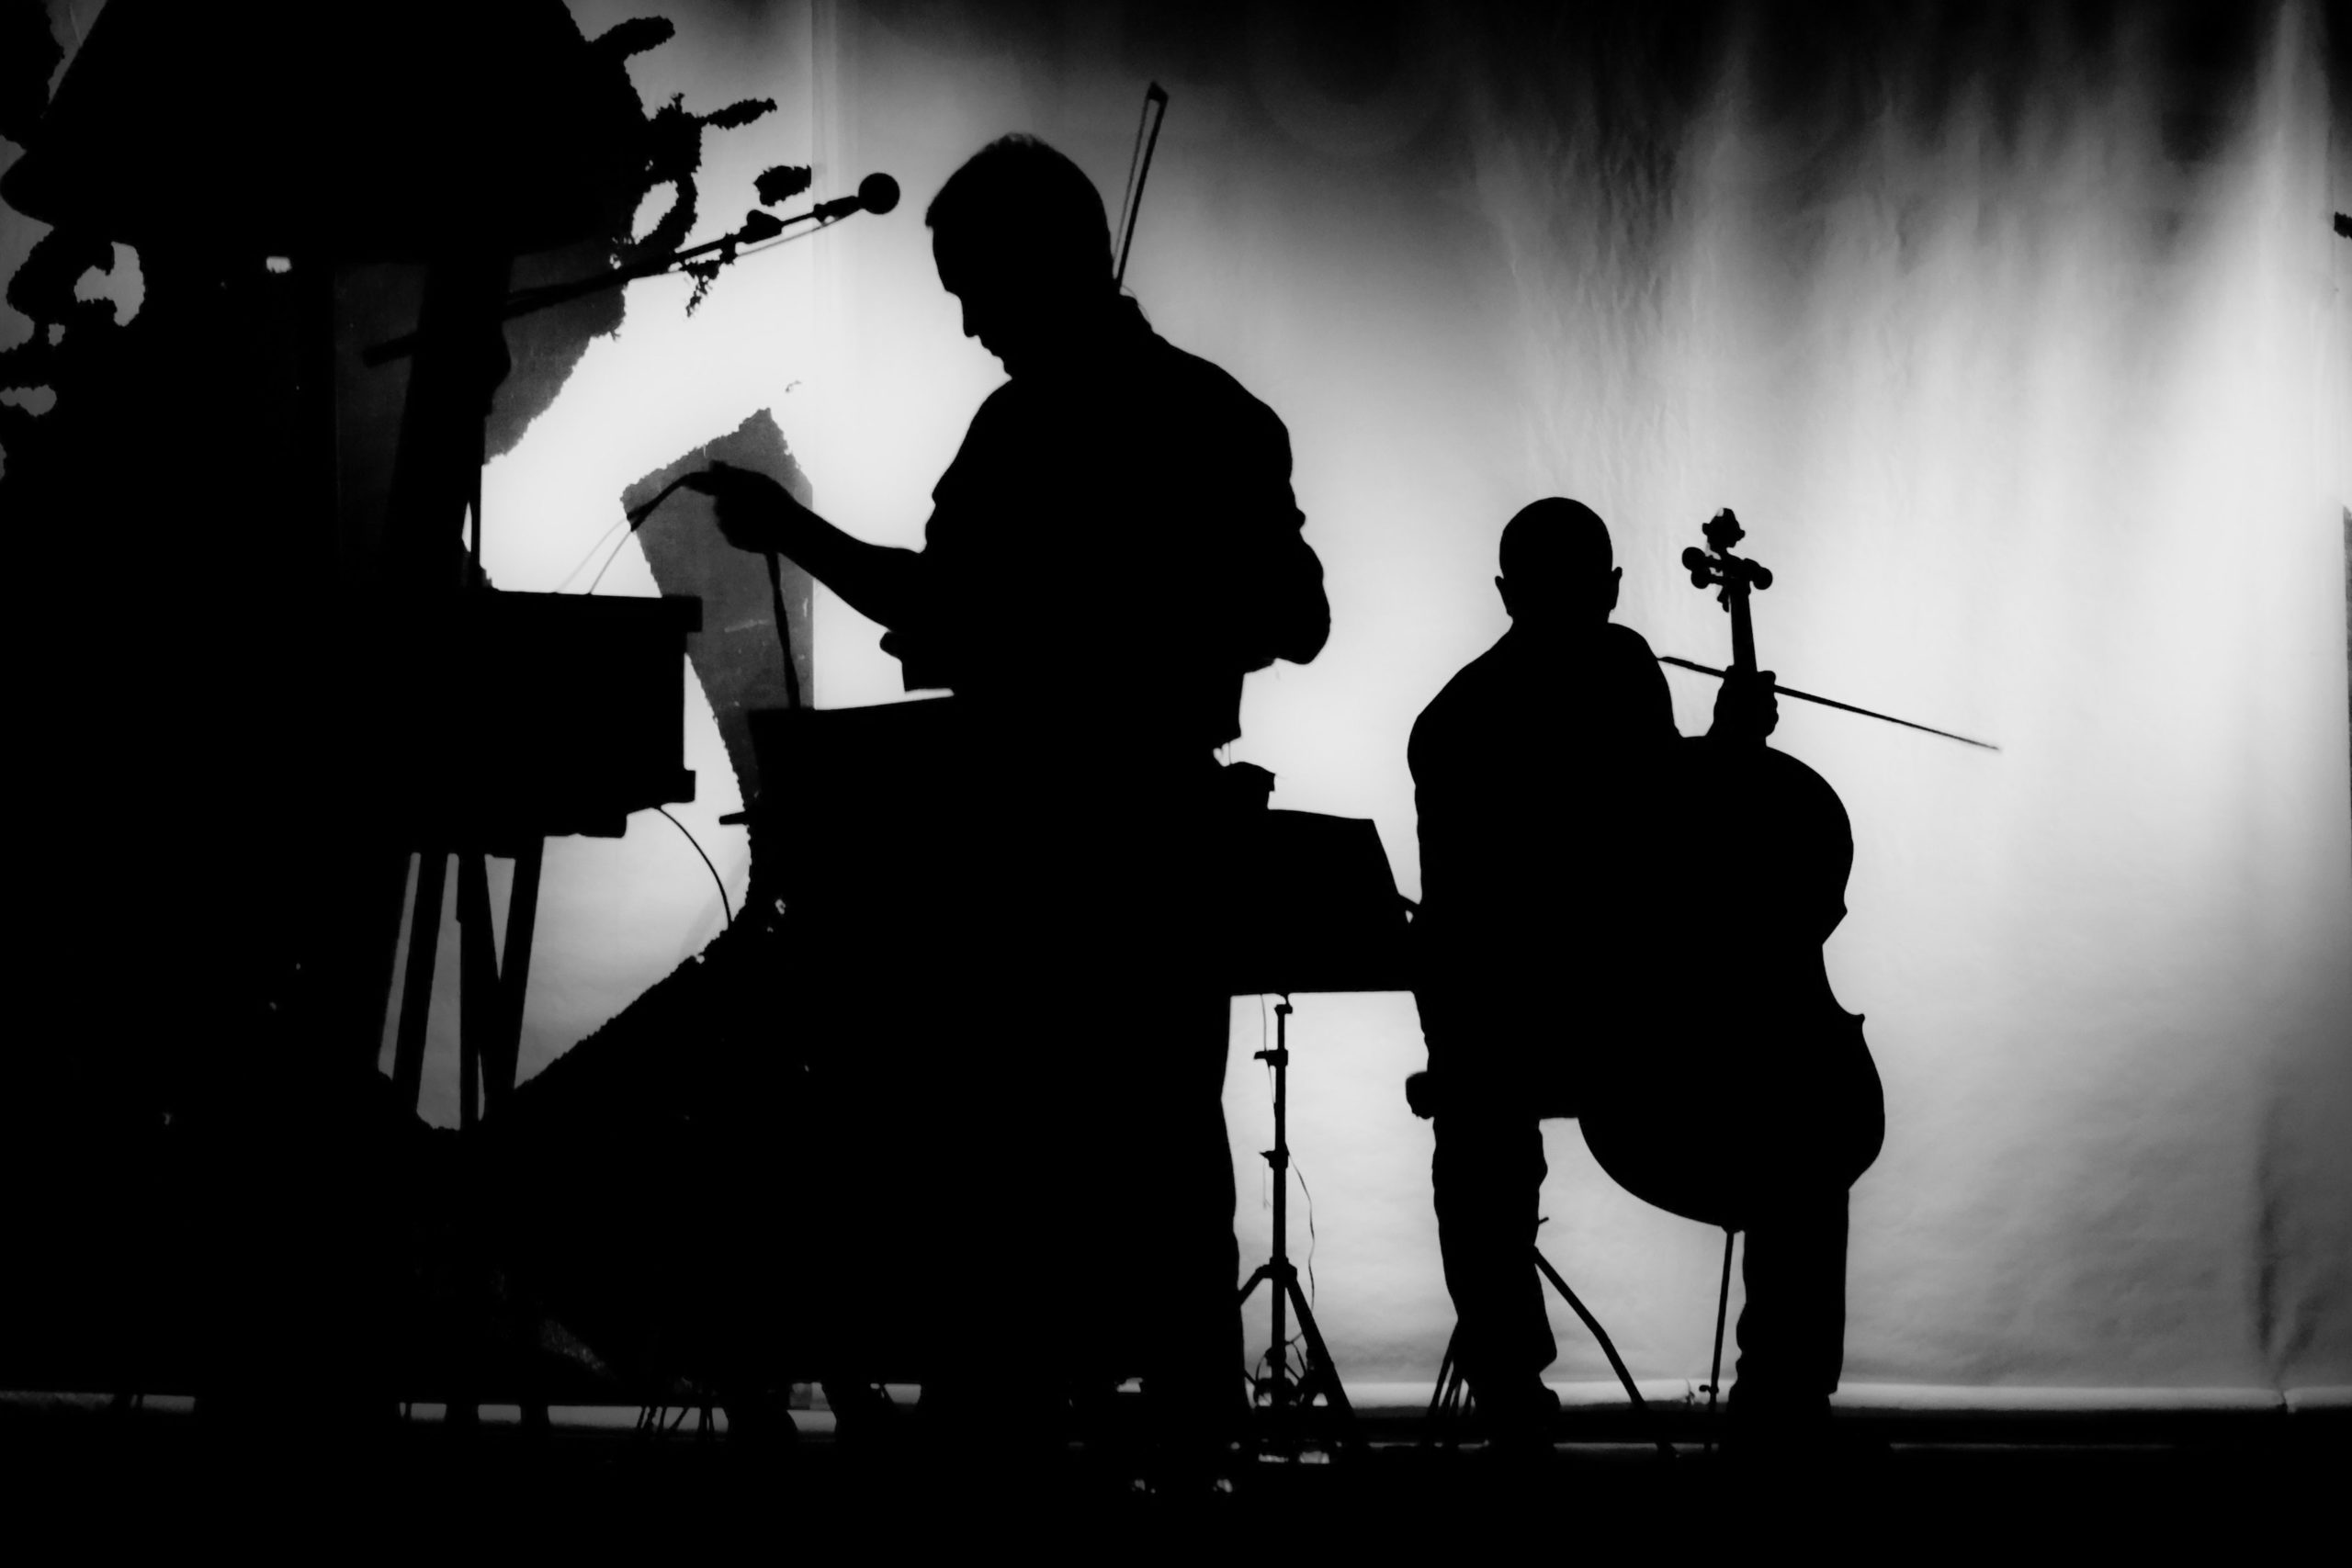 A shadow image of two performers, one cellist and one pianist